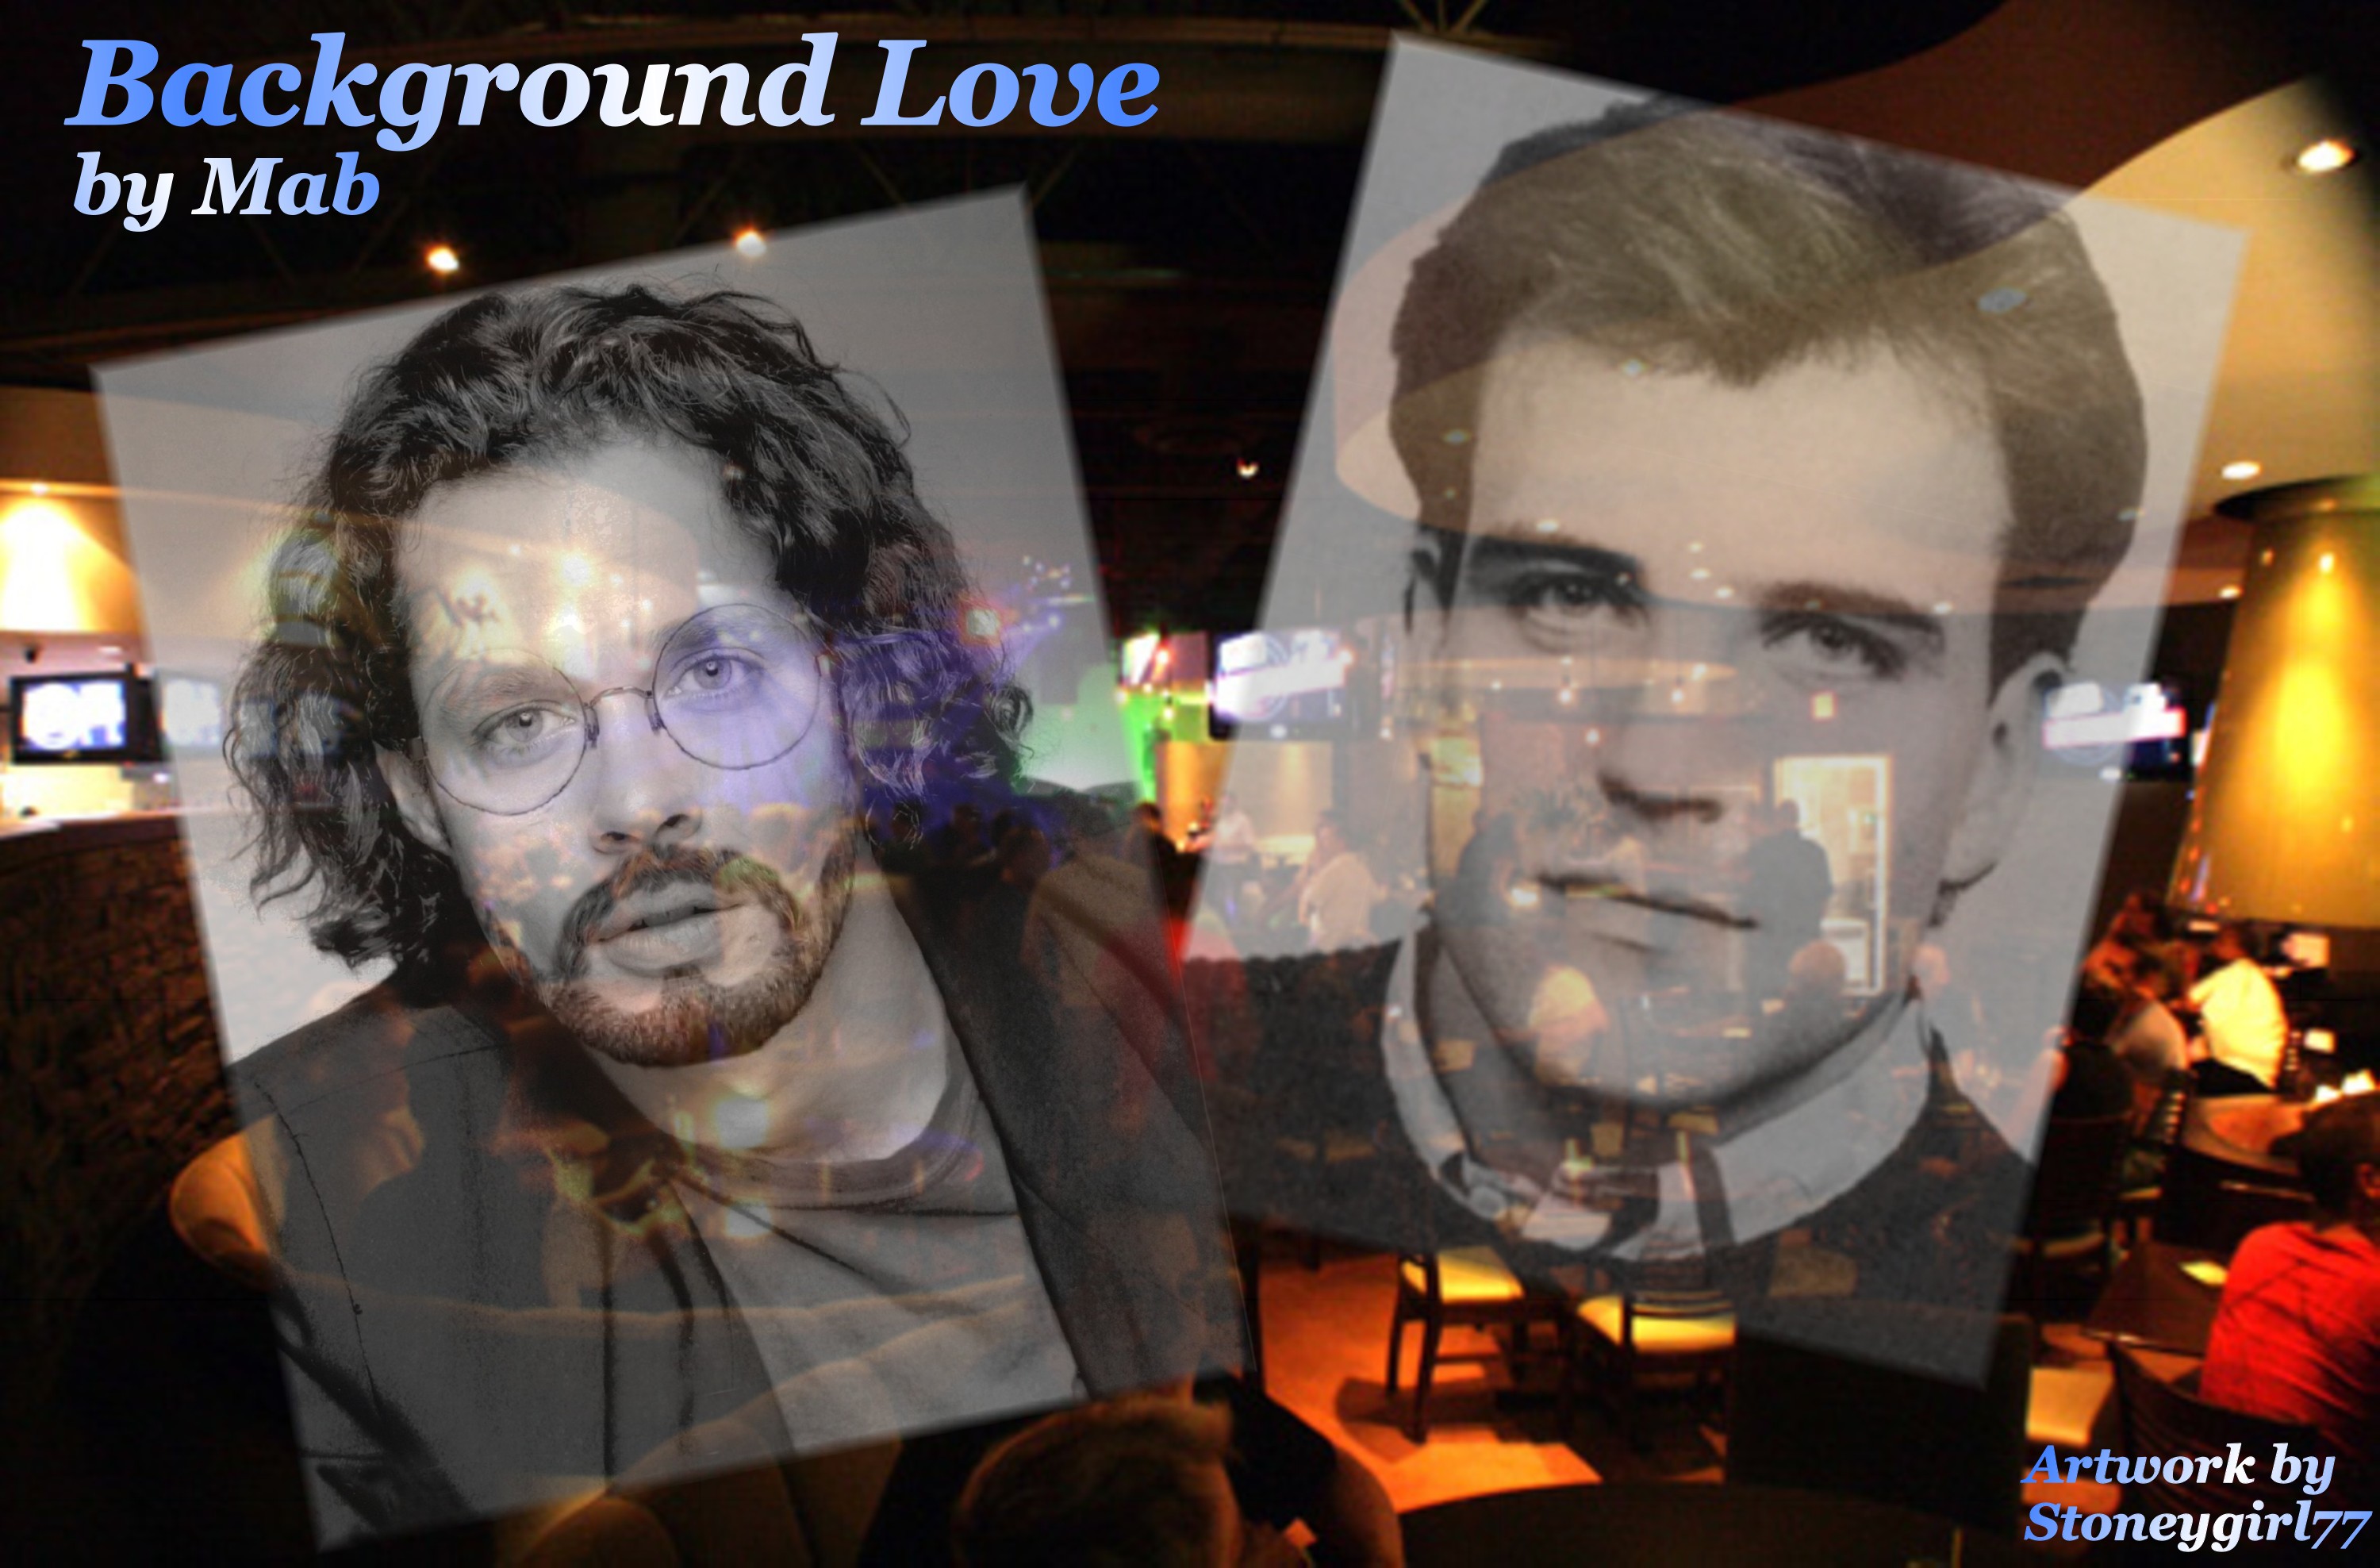 Background Love by Mab, art by Debbie Stone